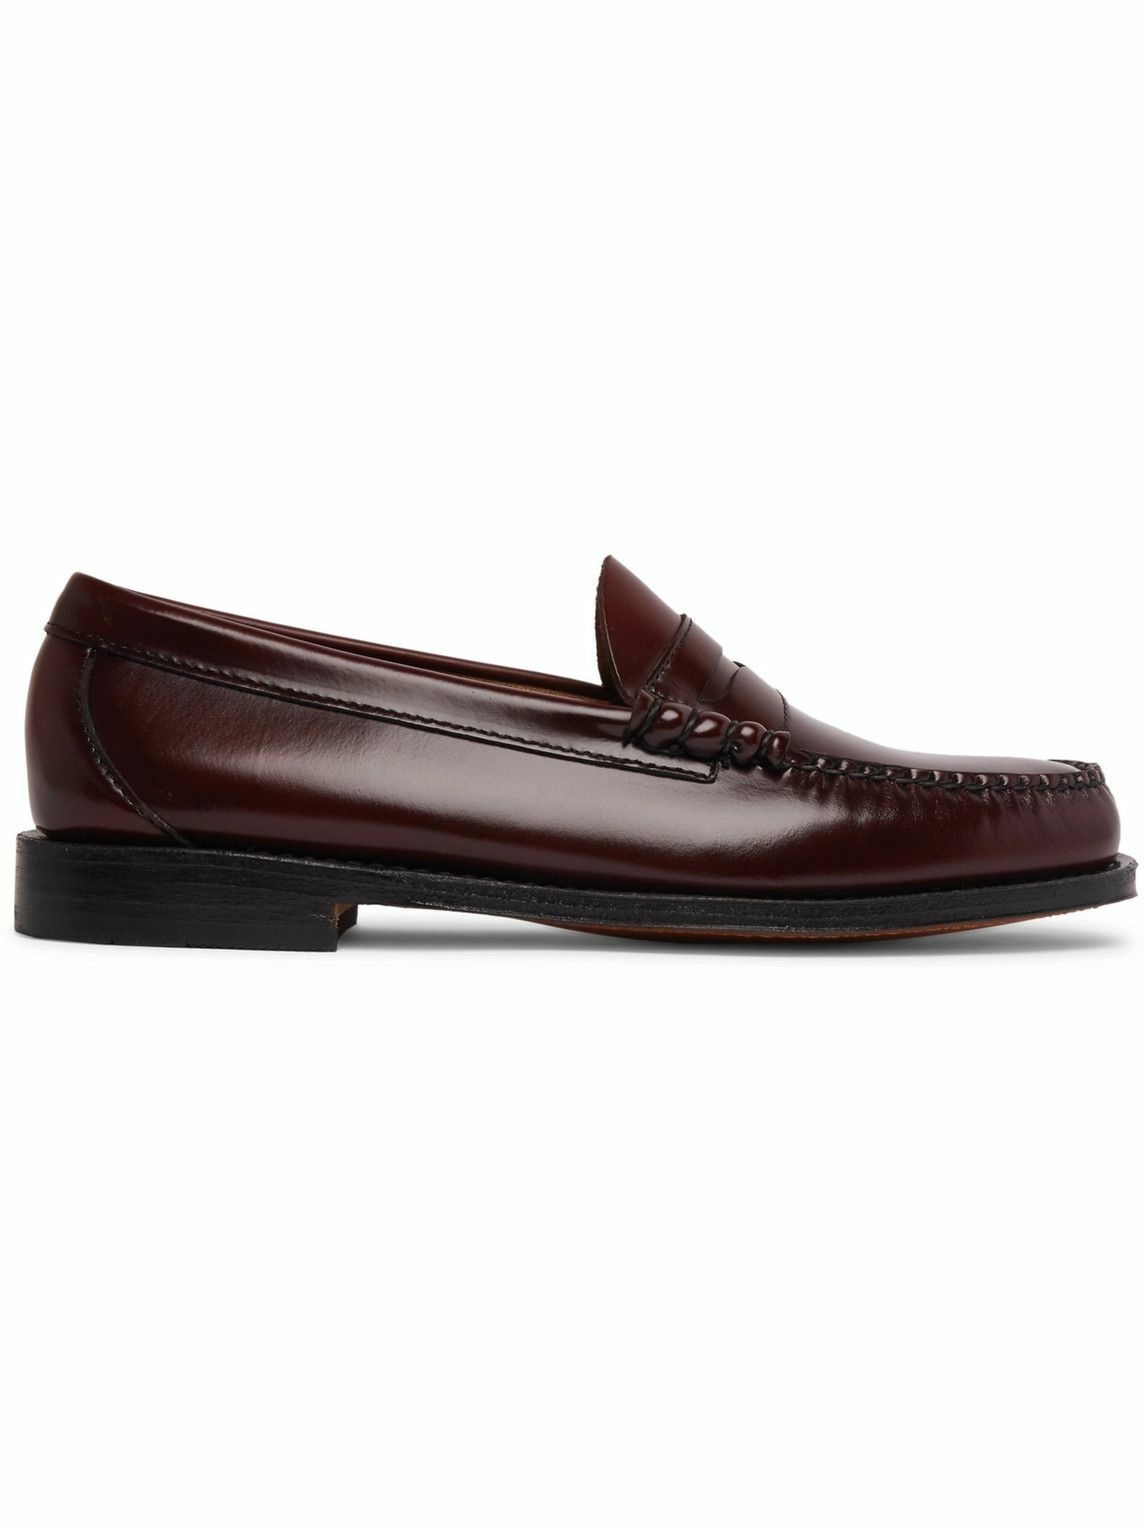 Photo: G.H. Bass & Co. - Weejuns Heritage Larson Leather Penny Loafers - Burgundy